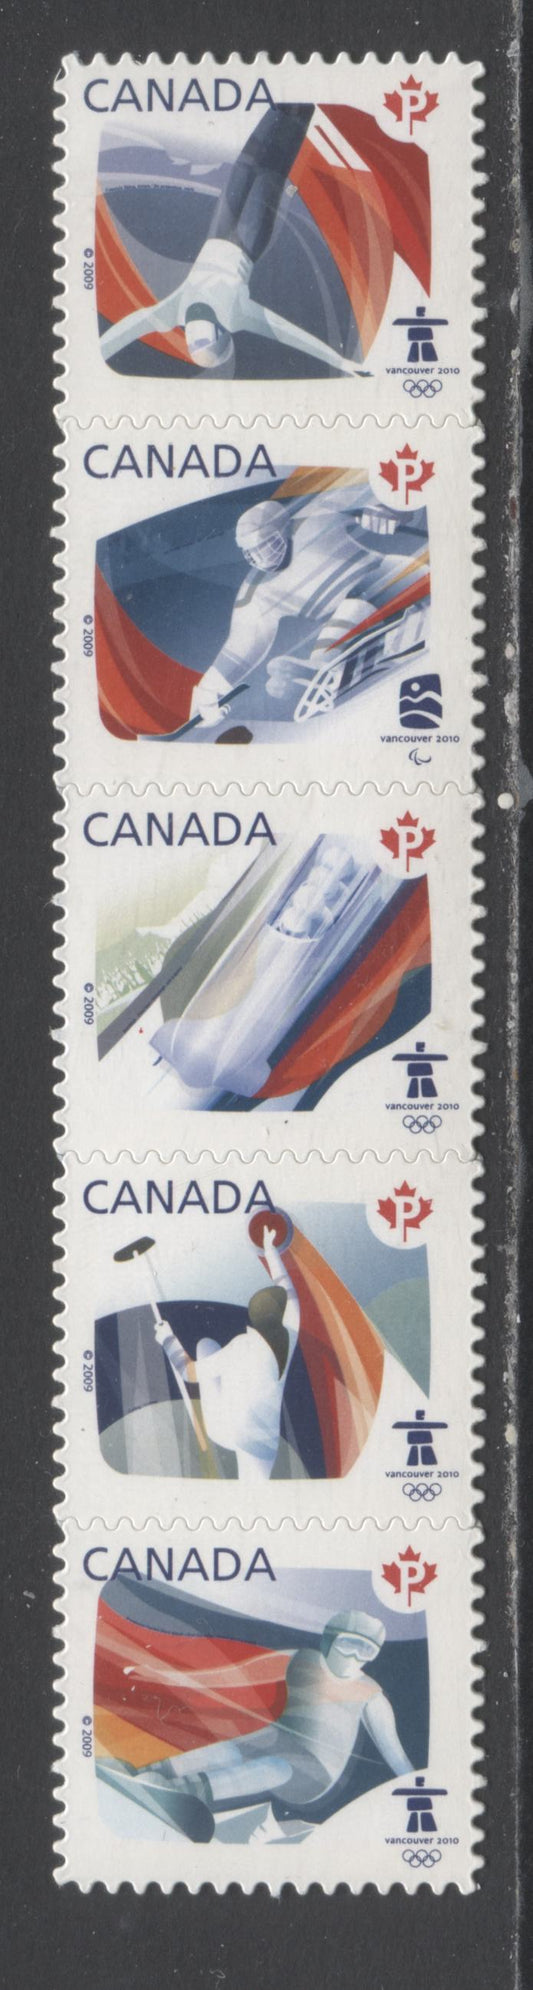 Lot 95 Canada #2304i P(52c) Multicolored Freestyle Skating - Snowboarding, 2009 Olympics, A VFNH Se-tenant Strip Of 5 Die Cut To Shape From Quarterly Pack